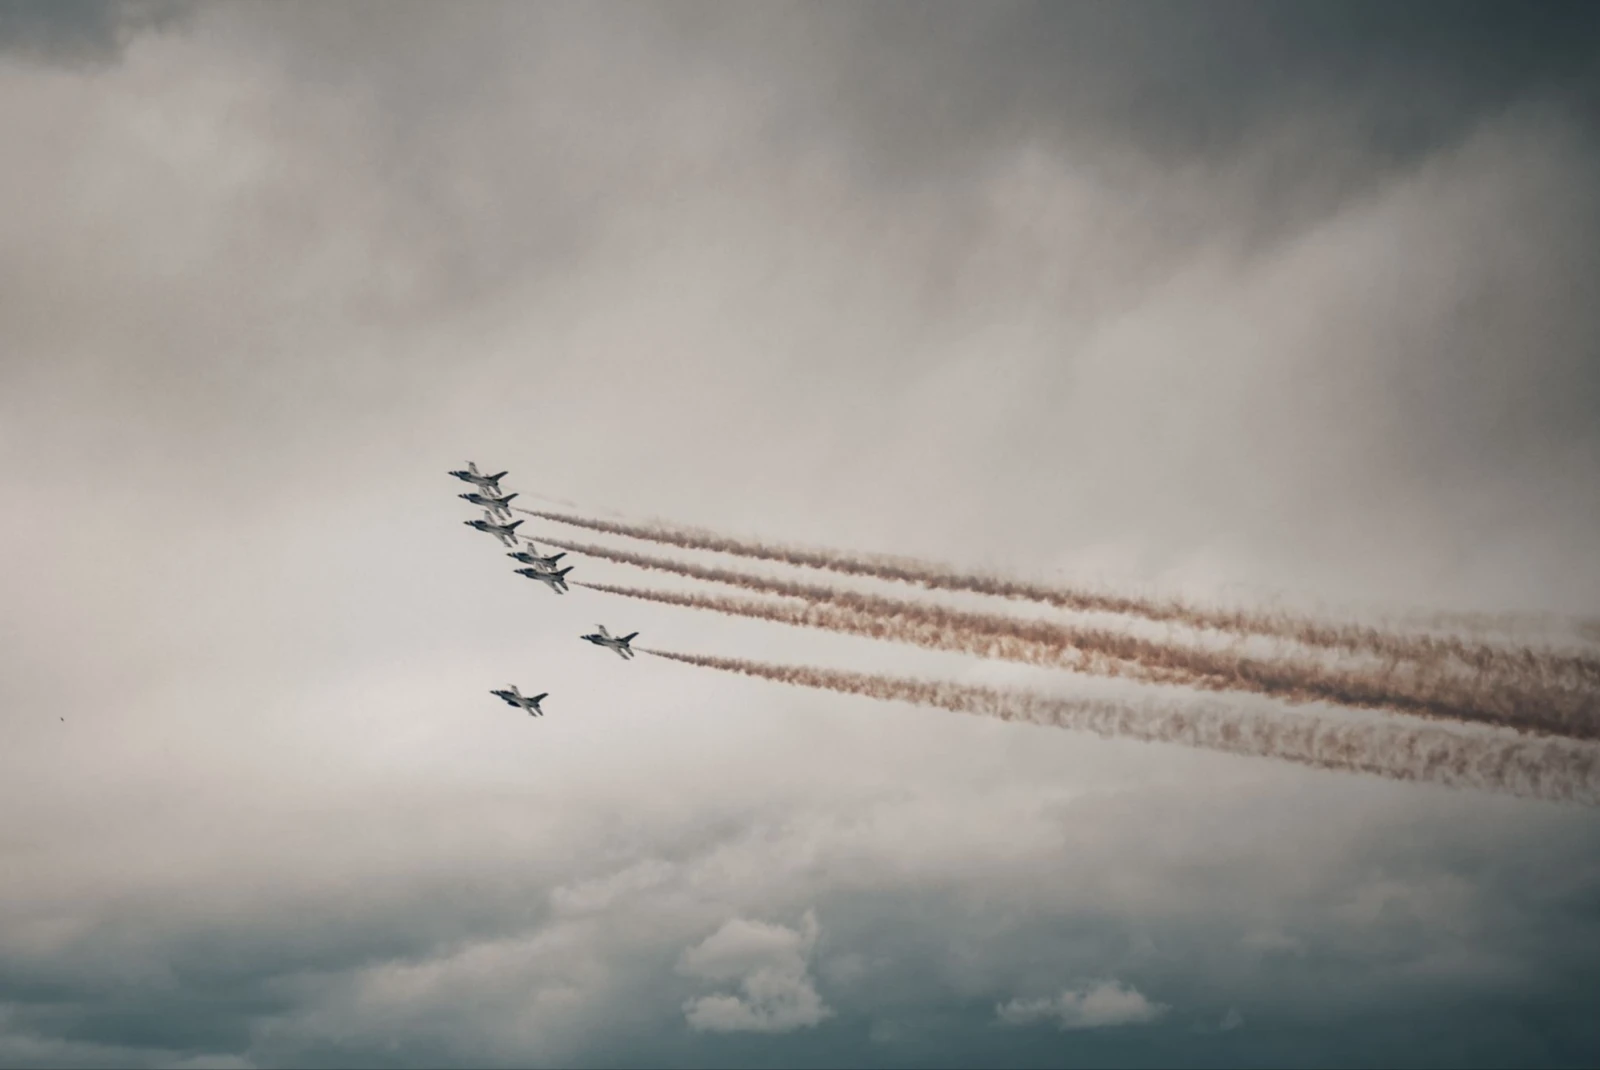 army aircraft flying in unison in a cloudy sky